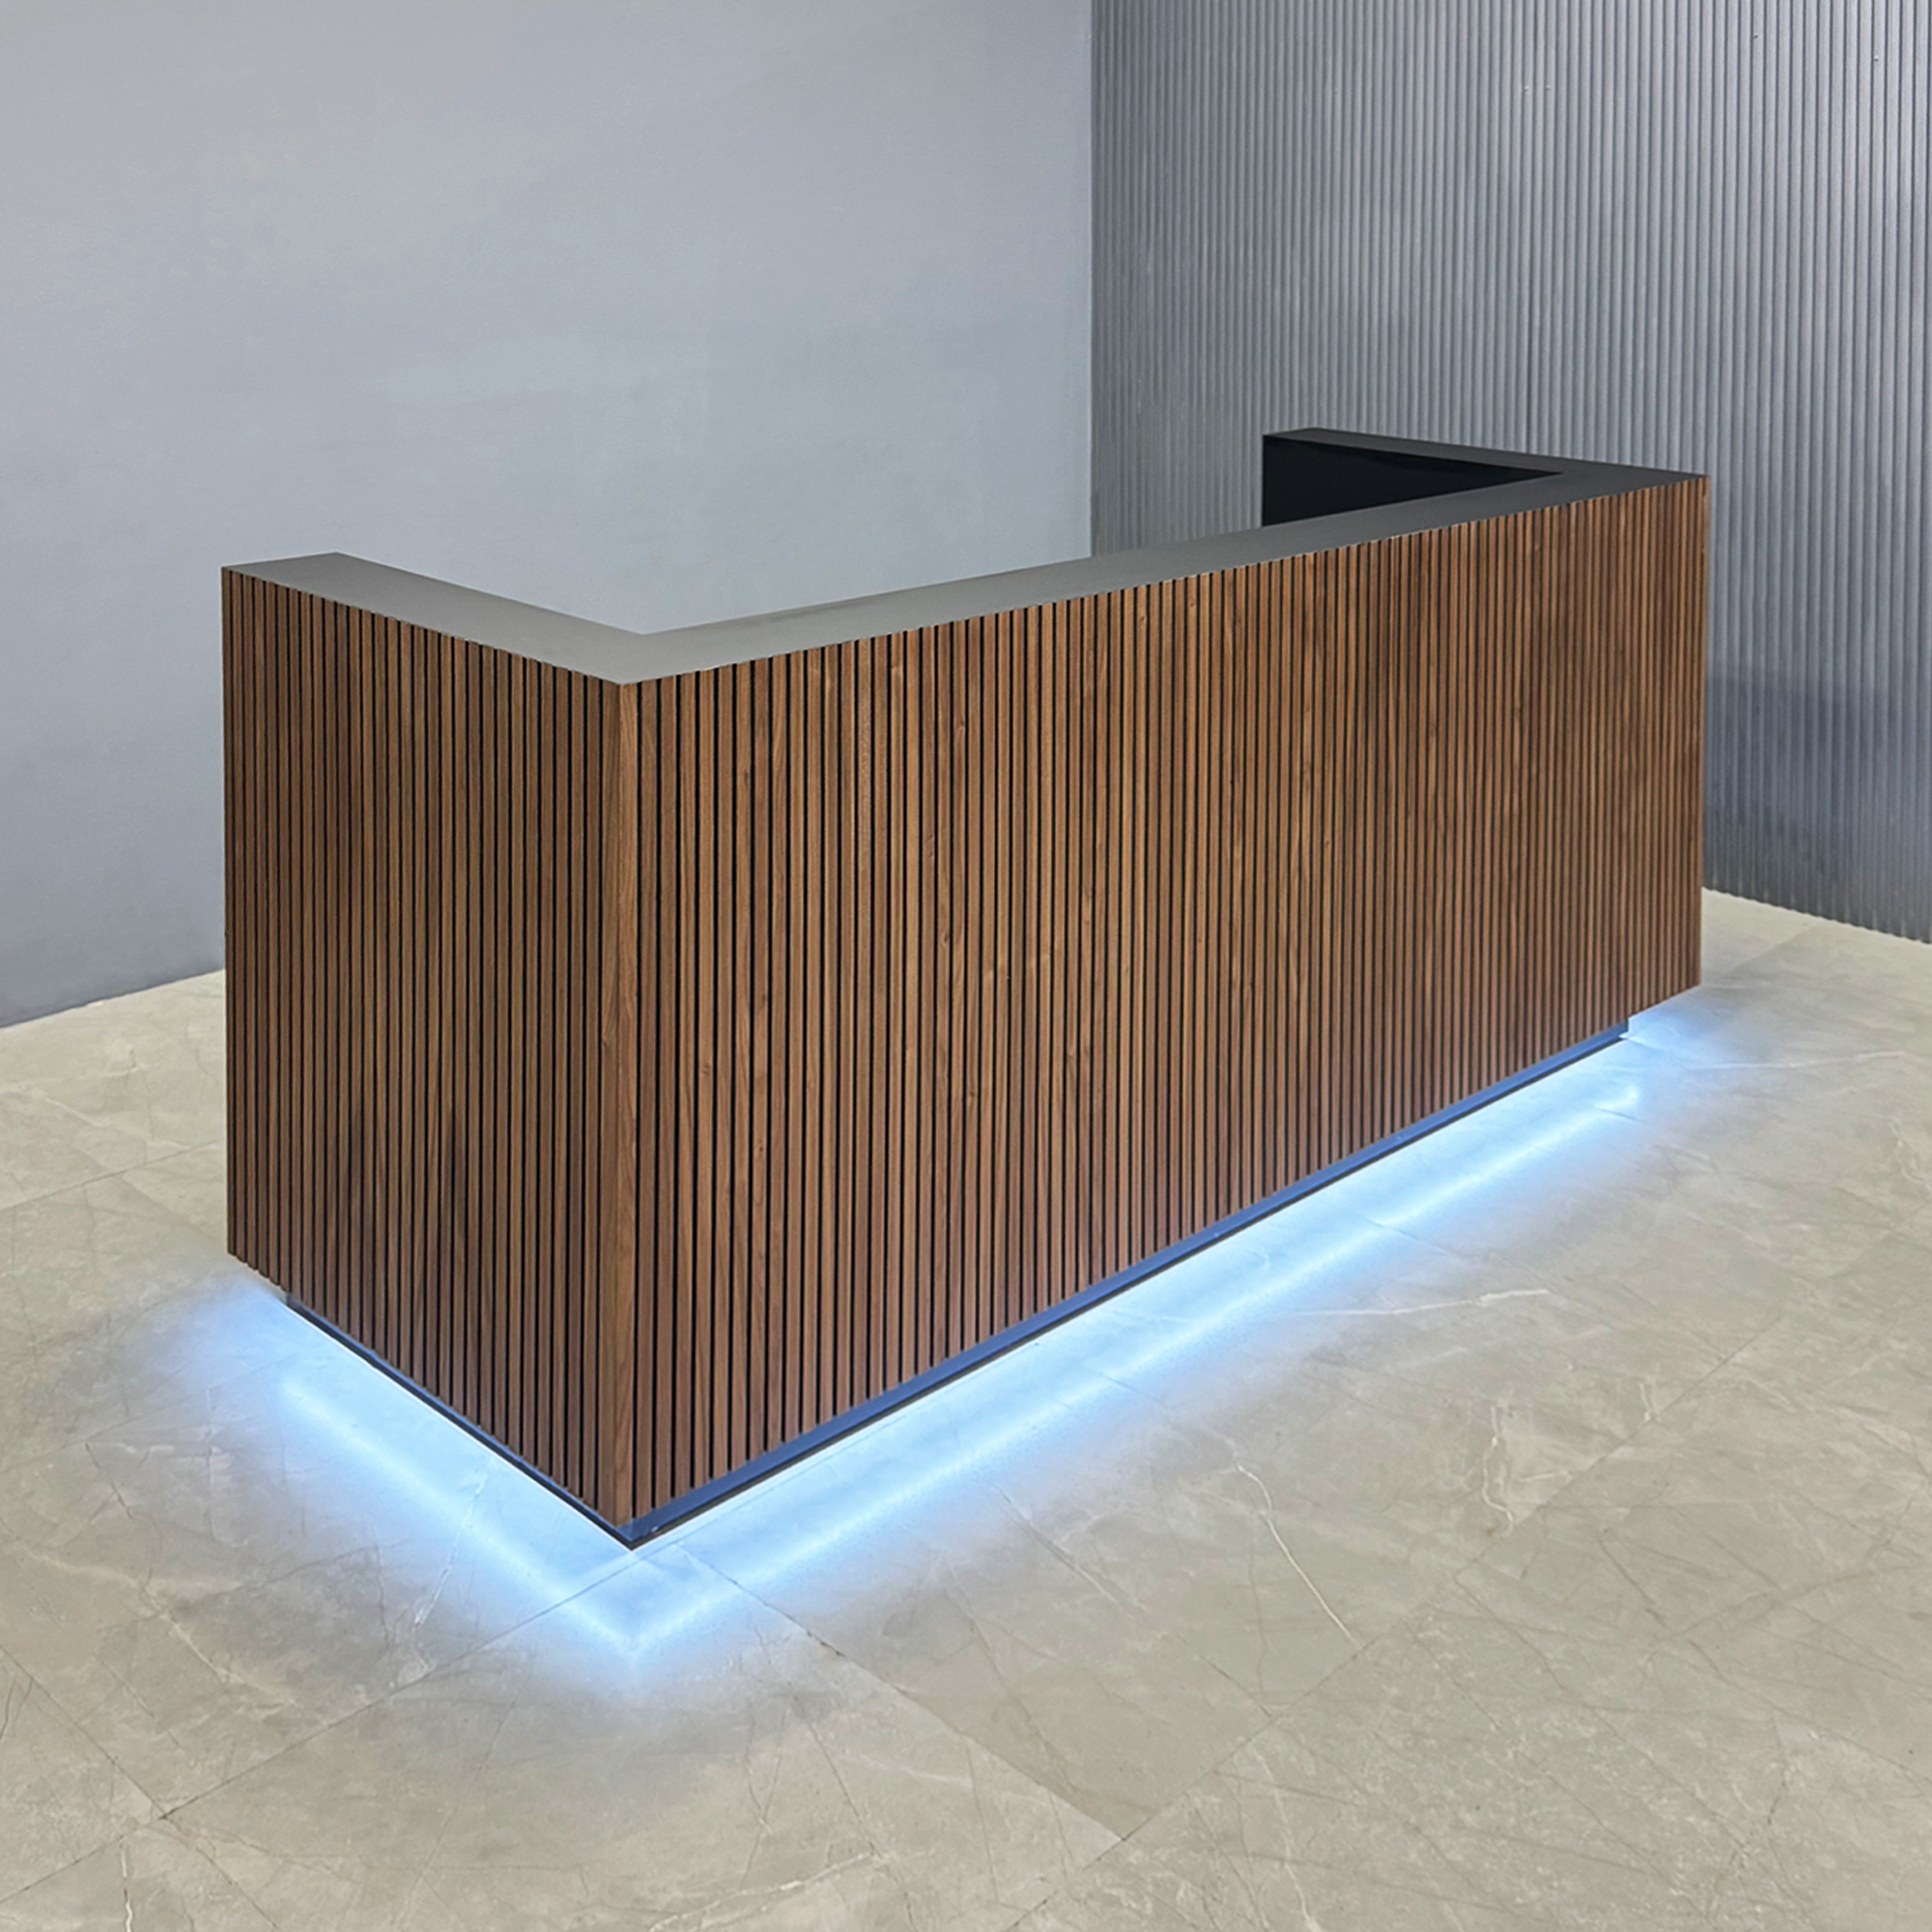 90-inch Dallas U-Shape Reception Desk in walnut tambour main desk and black traceless laminate workspace and toe-kick, with color LED, shown here.